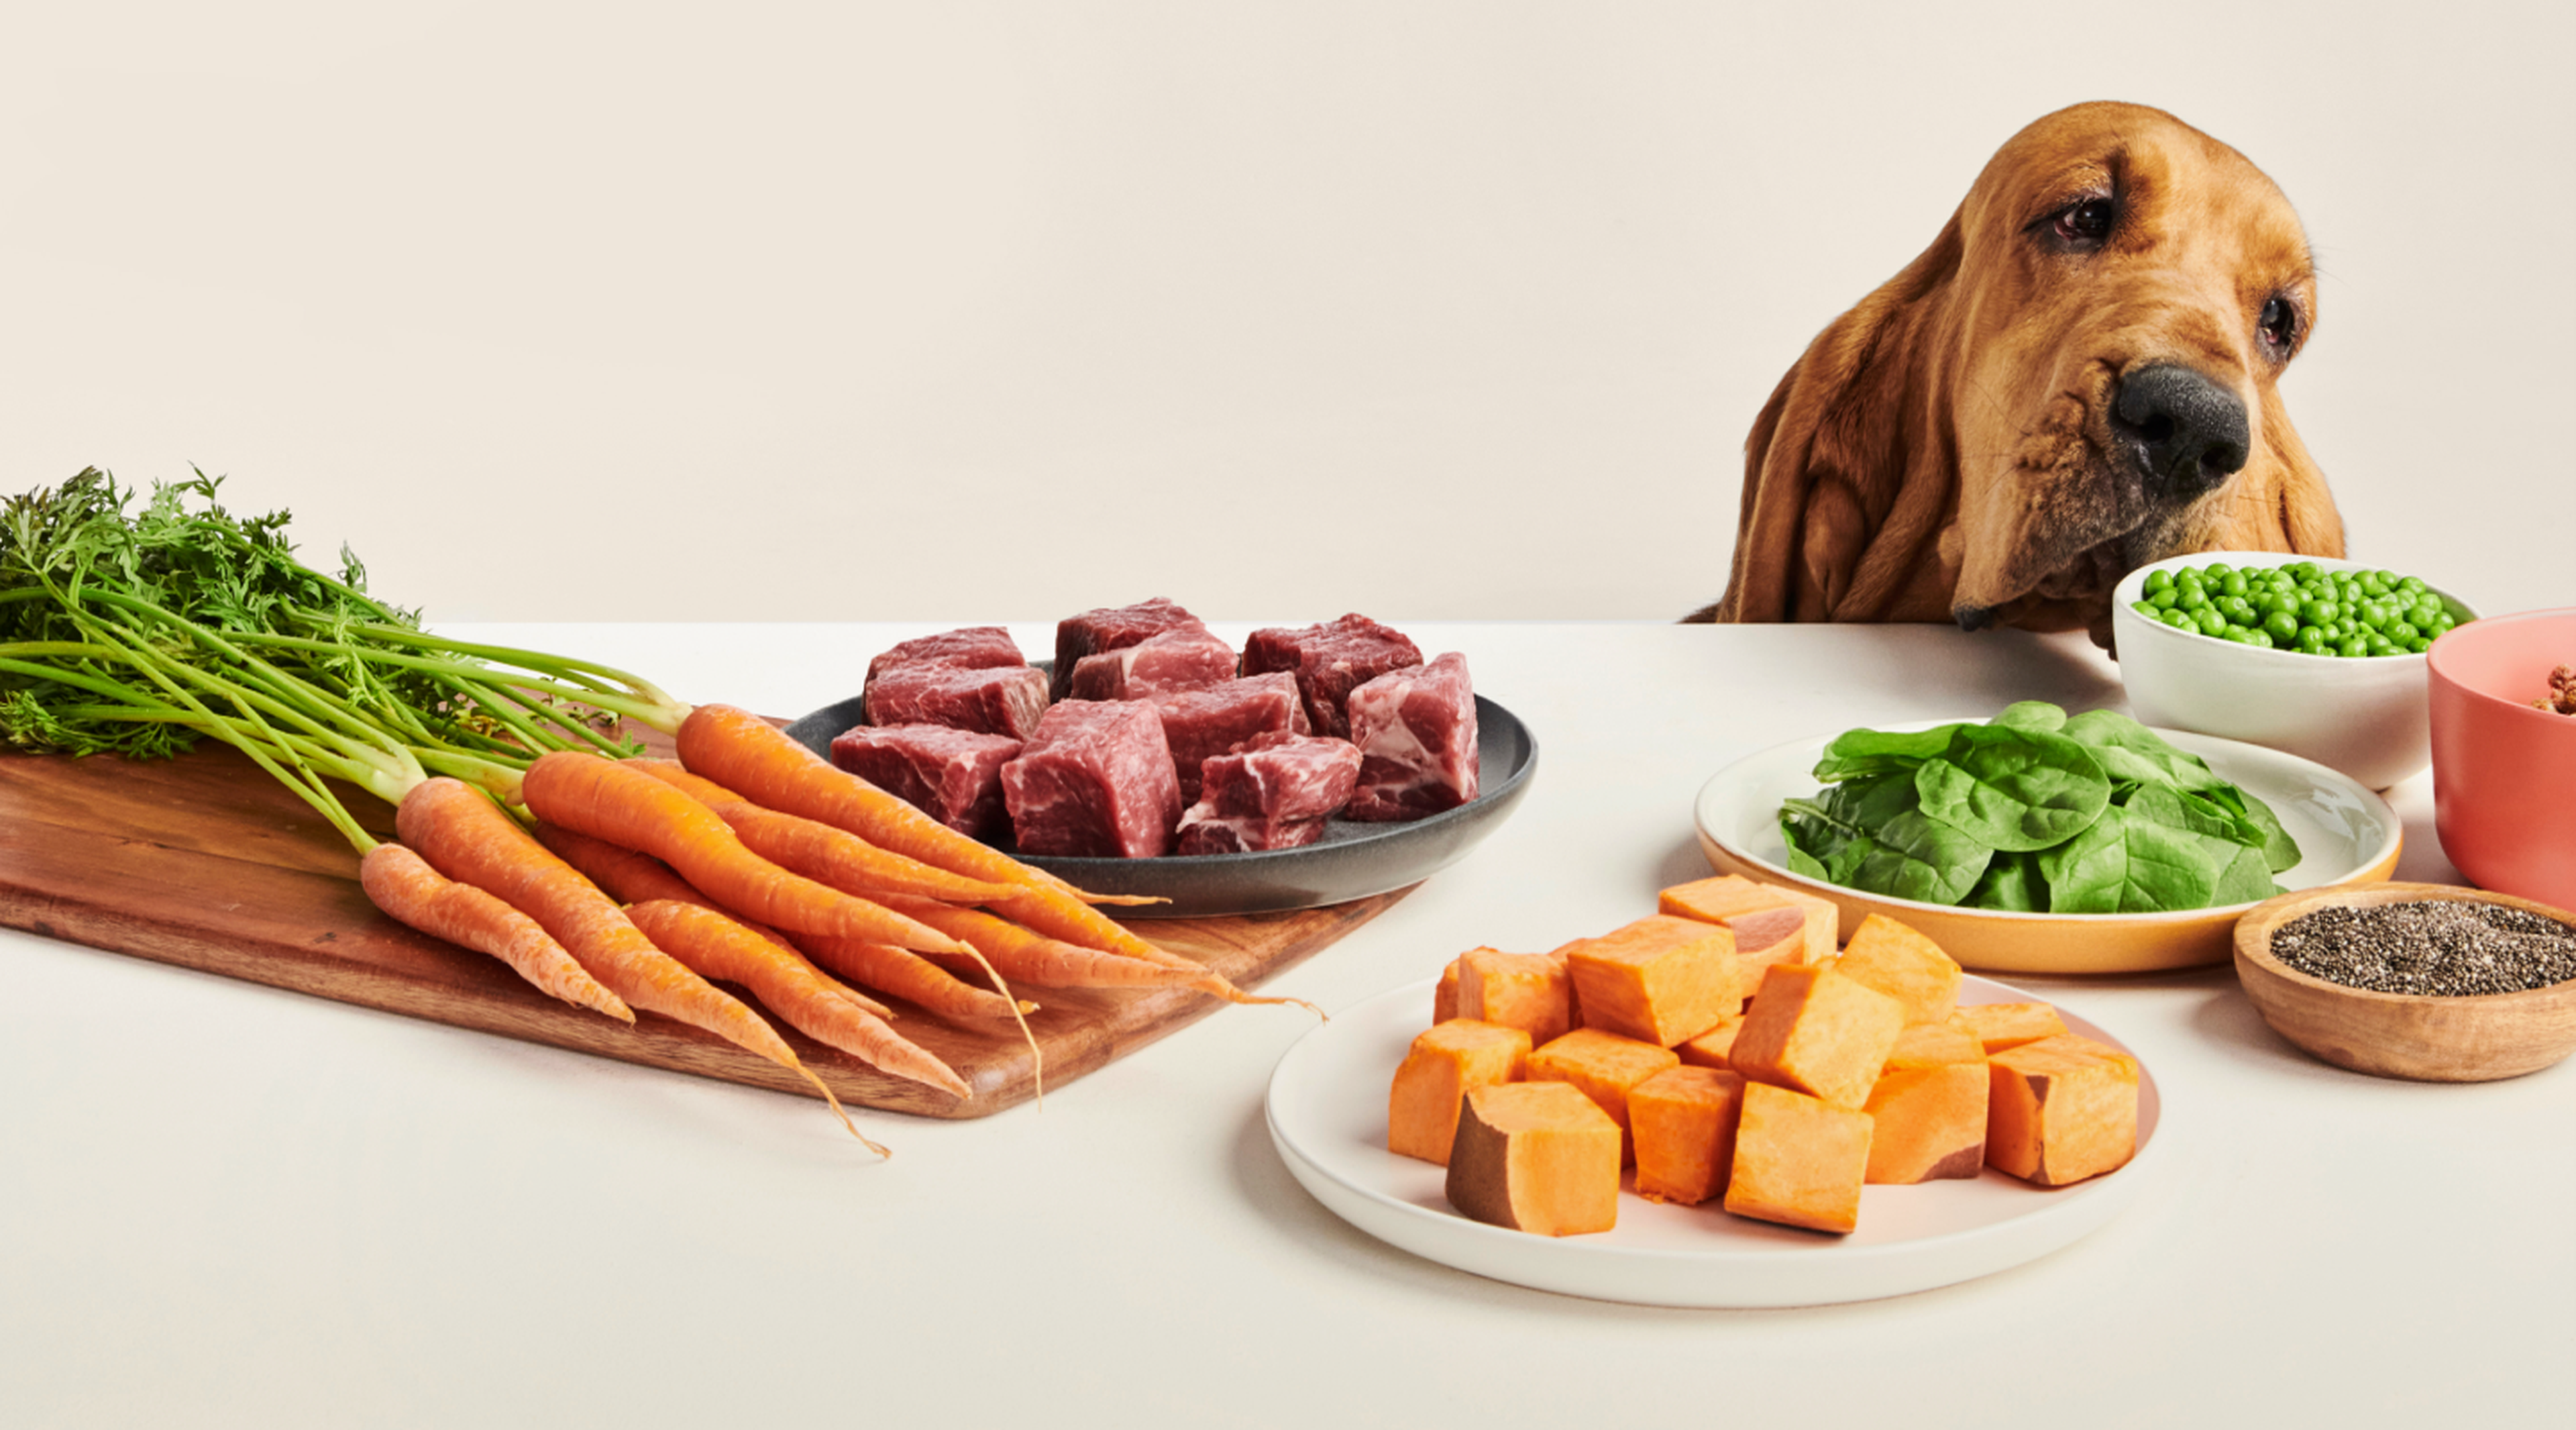 A Bloodhound dog surrounded by fresh ingredients, like carrots and sweet potatoes and beef